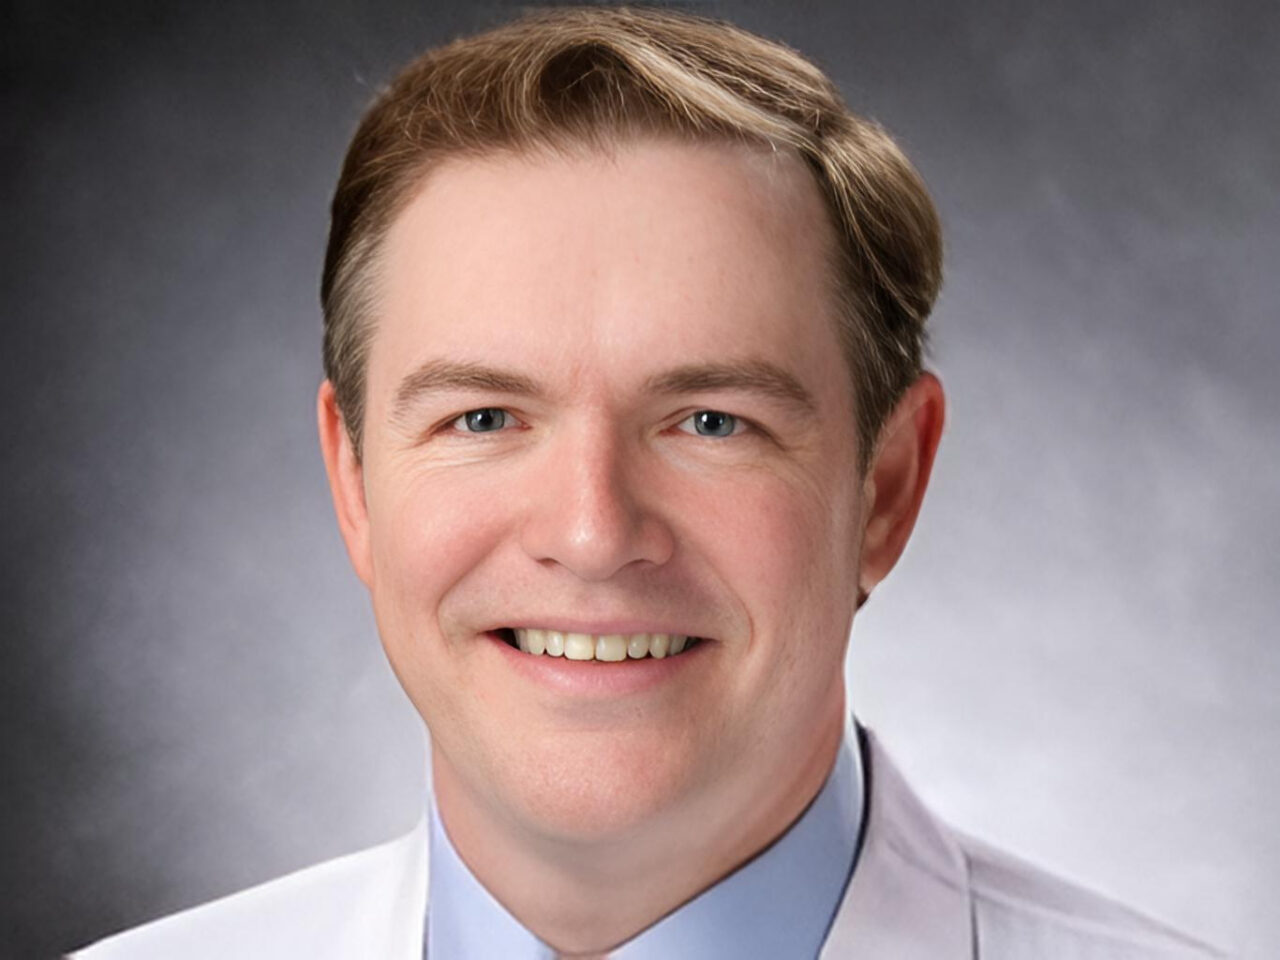 Jason Westin has been named Advocate of the Year by ASCO